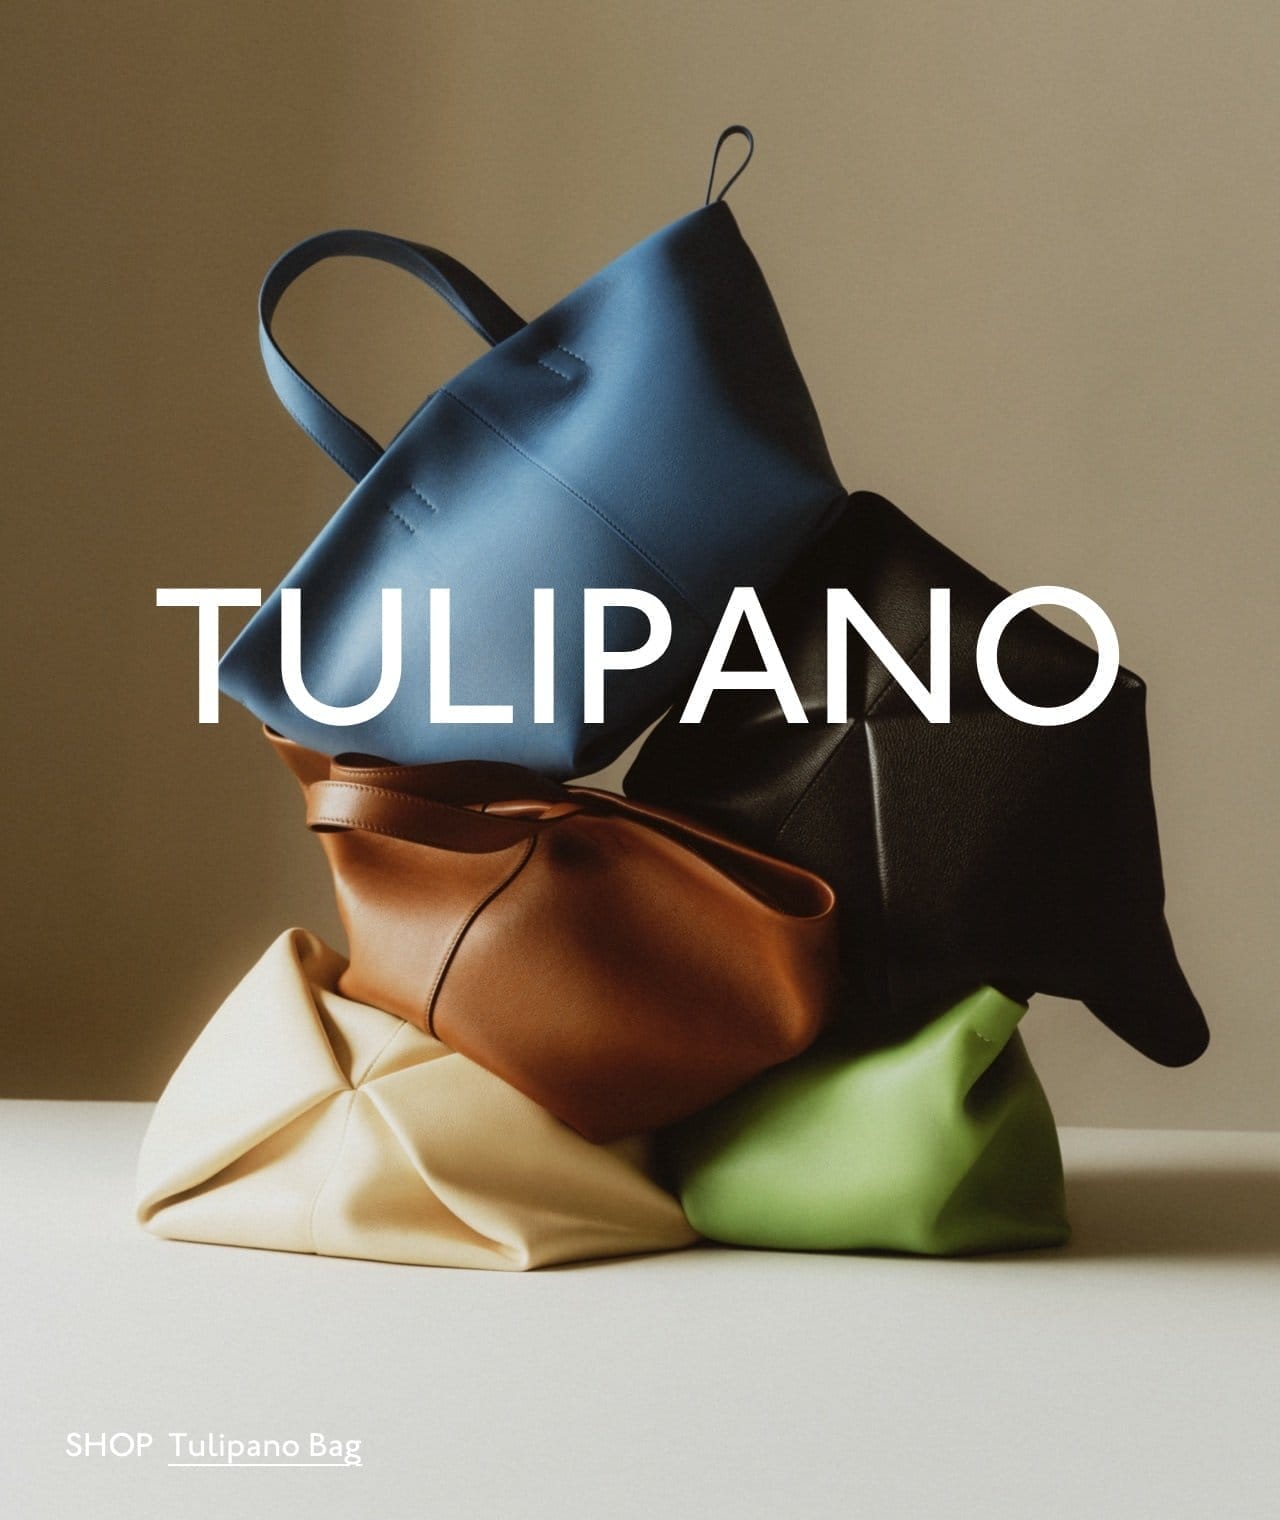 Our Tulipano bag is back. Pictured: the Tulipano Bag in Black, Lago, Avorio, Seaglass and Desert.